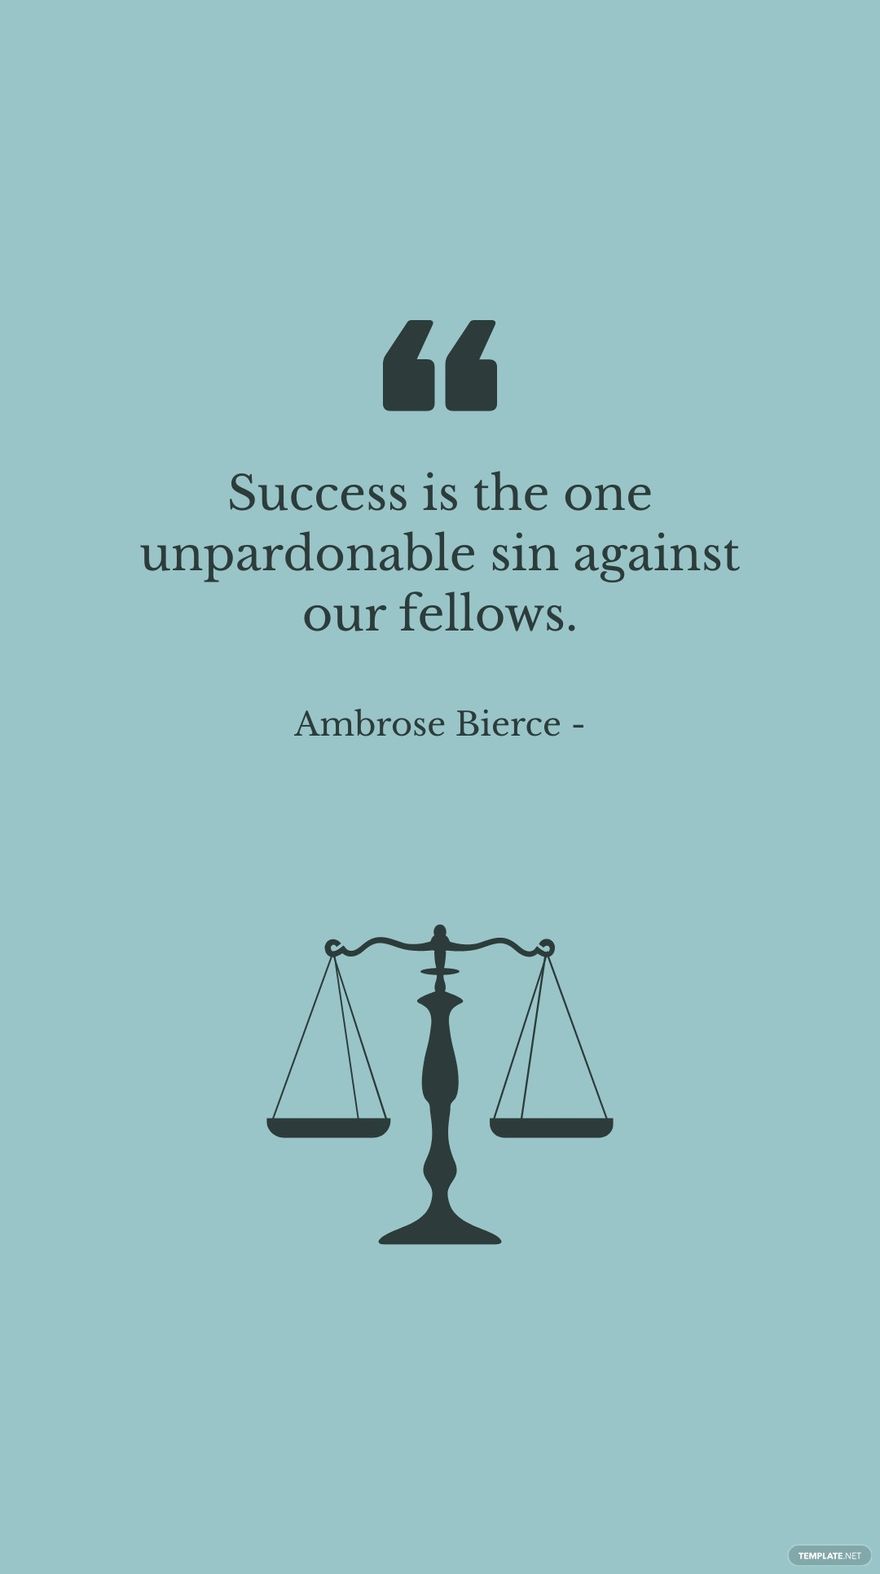 Free Ambrose Bierce - Success is the one unpardonable sin against our fellows.